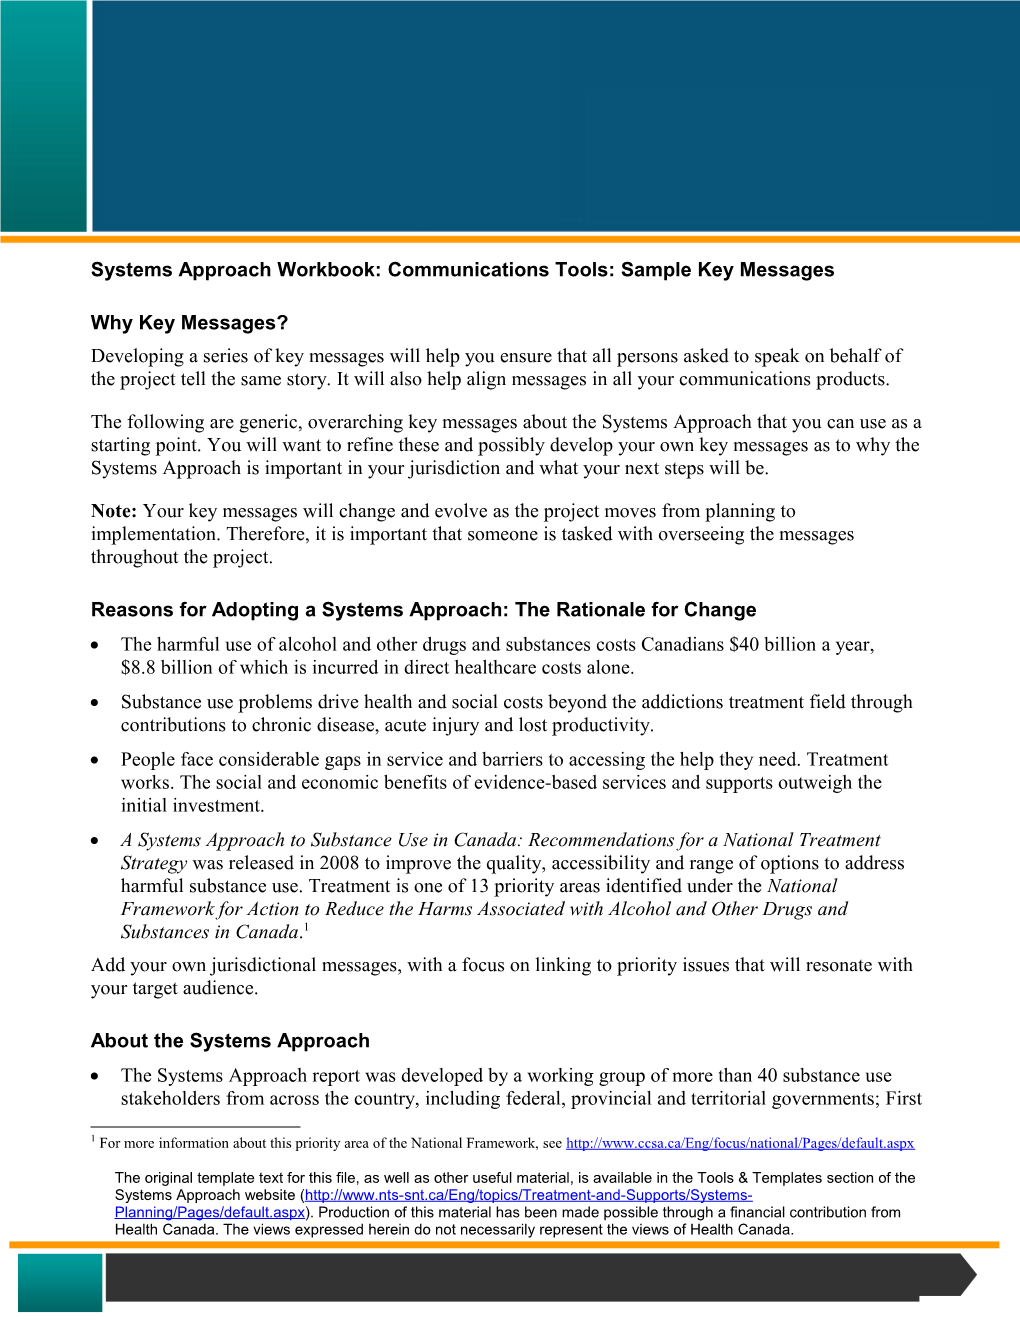 Systems Approach Workbook: Communications Tools: Sample Key Messages